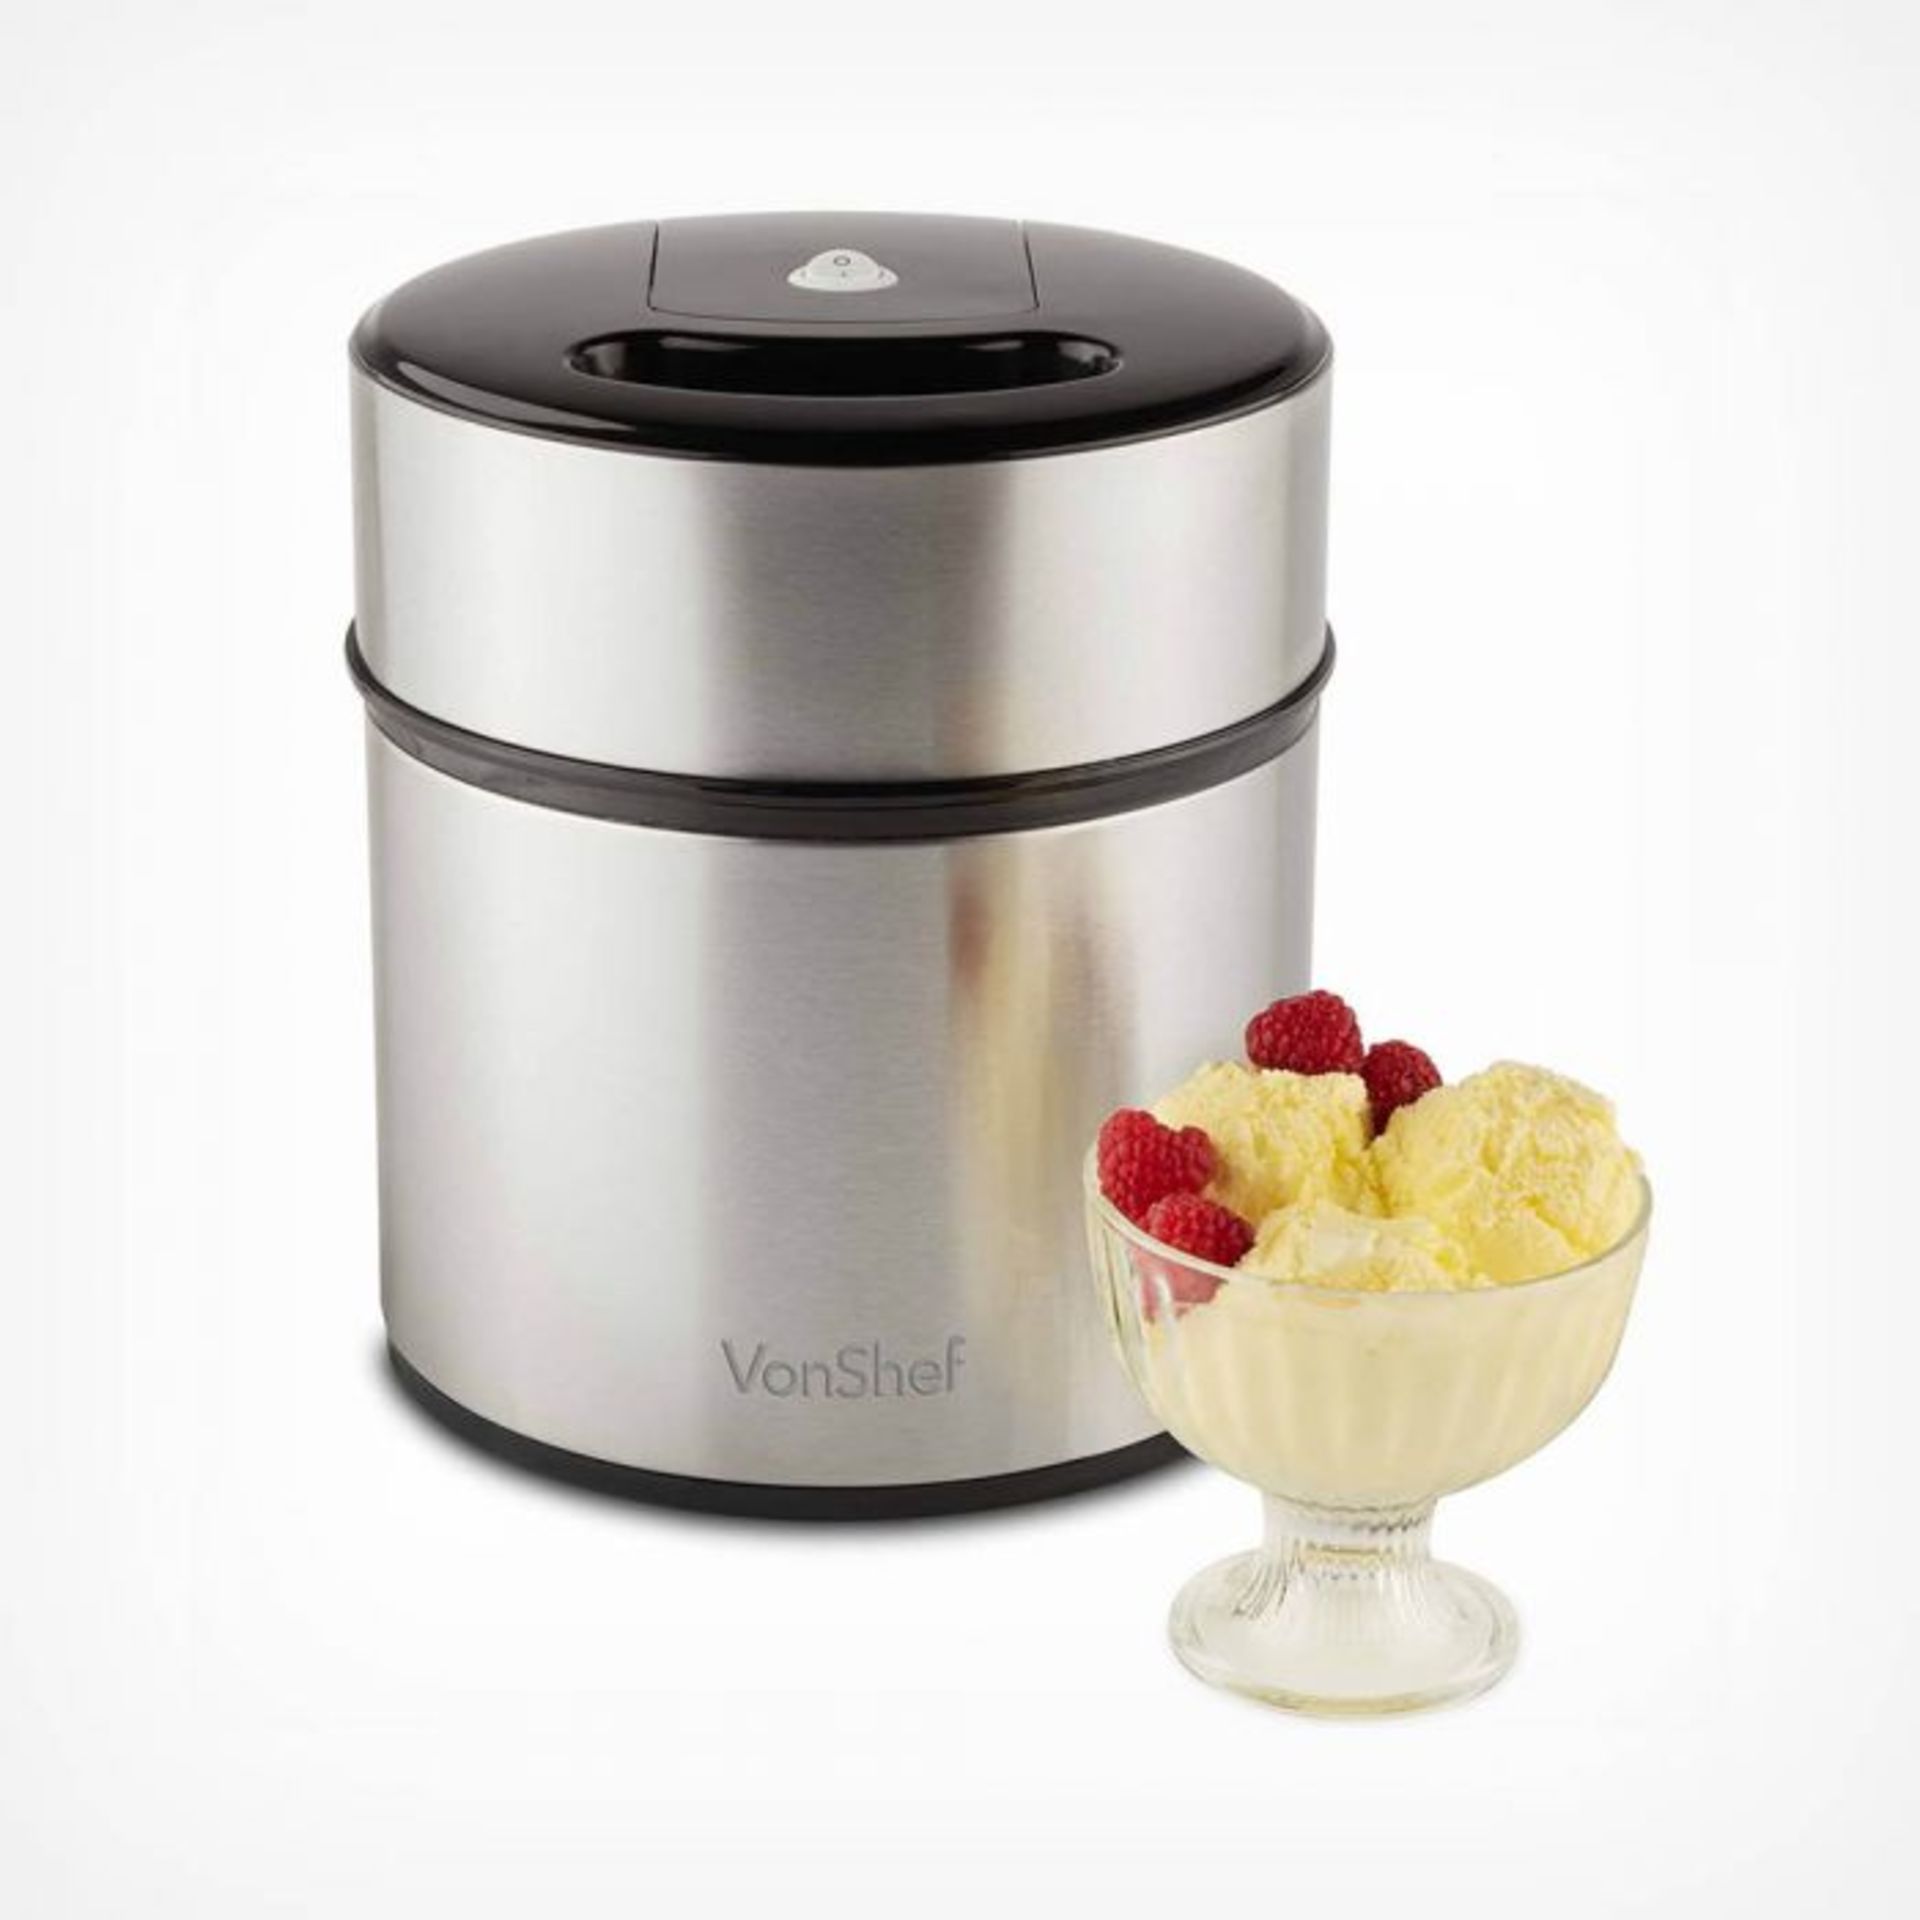 Stainless Steel Ice Cream Maker. Treat the whole family to some delicious homemade ice-cream with